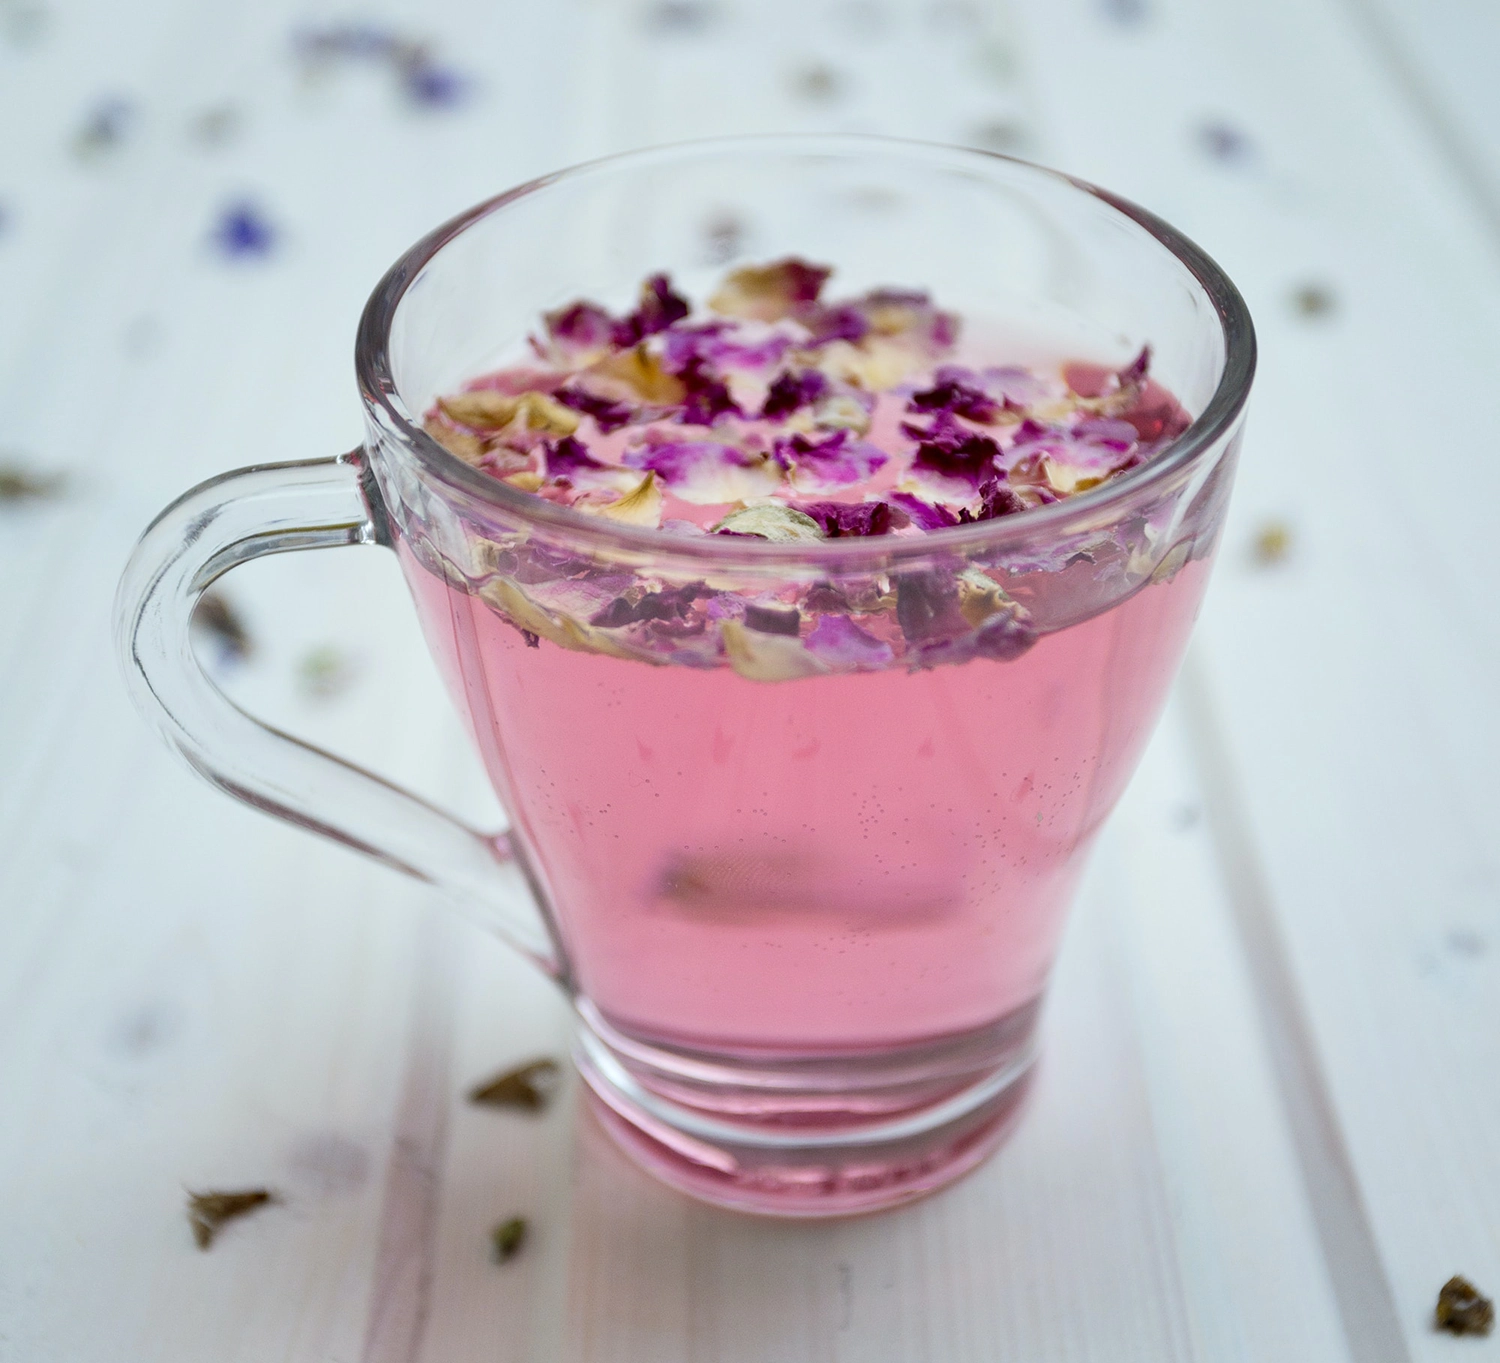 How to incorporate herbal teas into your wellness routine